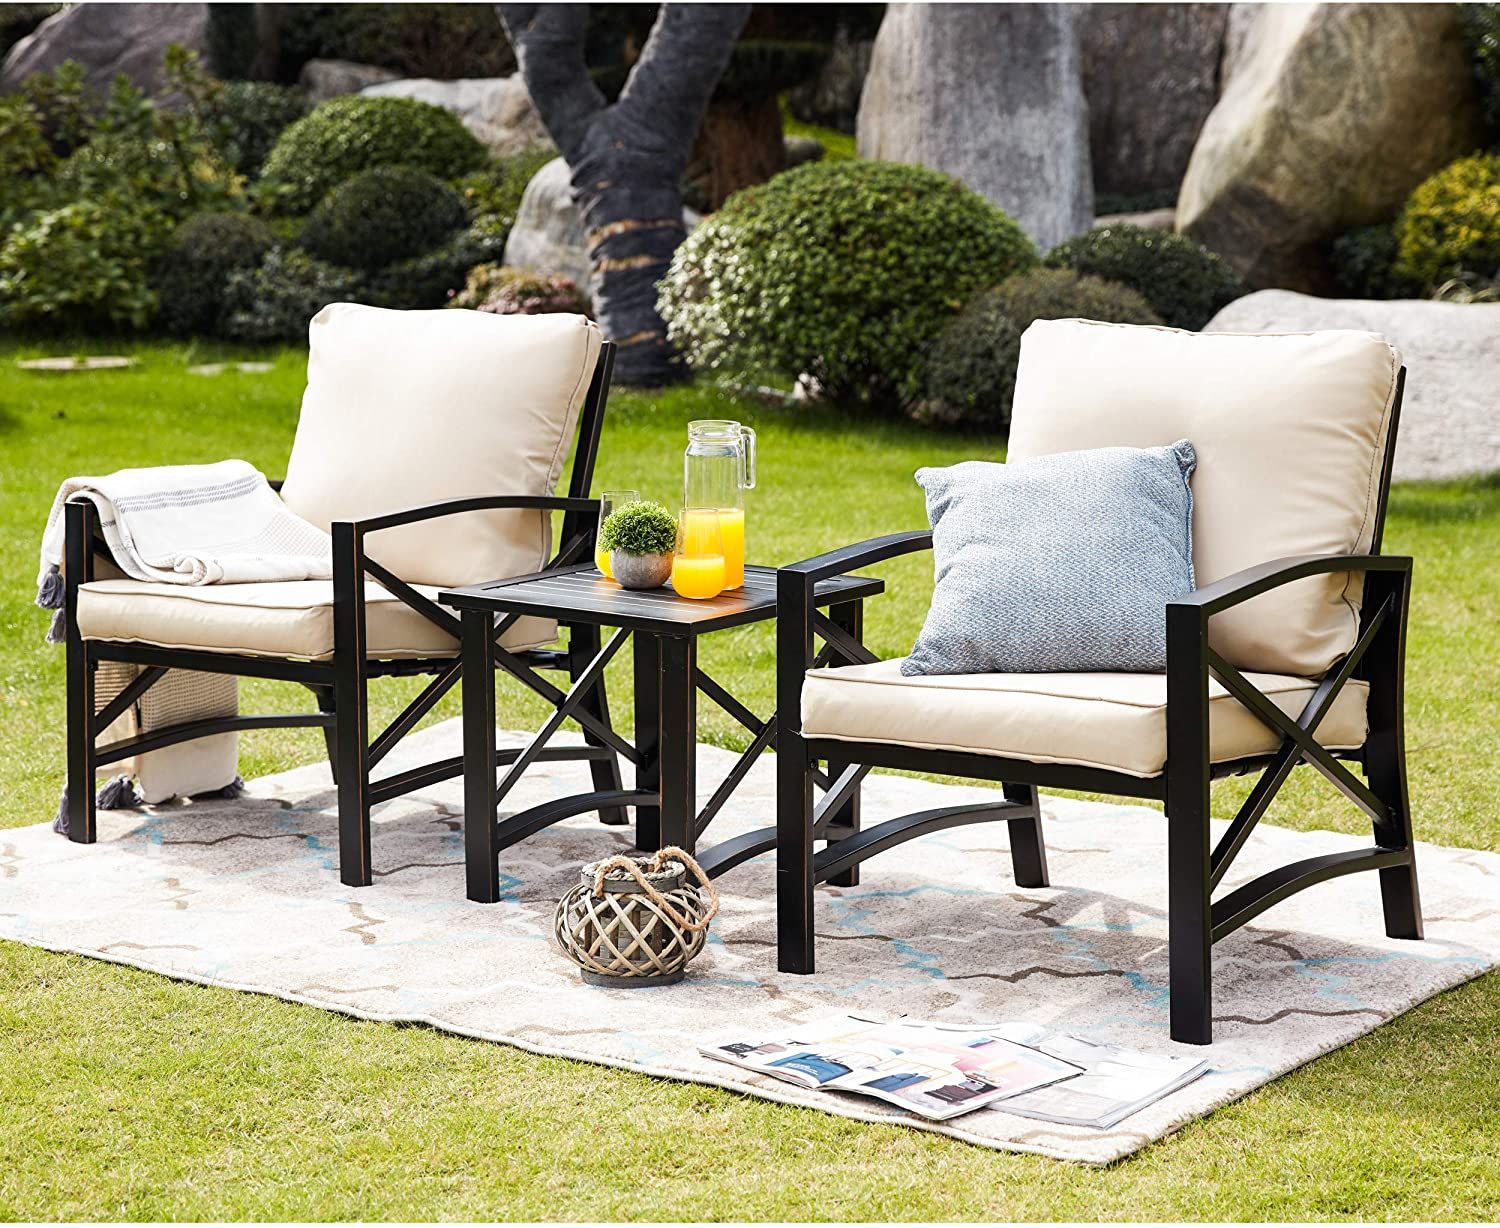 8 Best Patio Furniture Sets 2021 The Strategist - Best Furniture For Patio